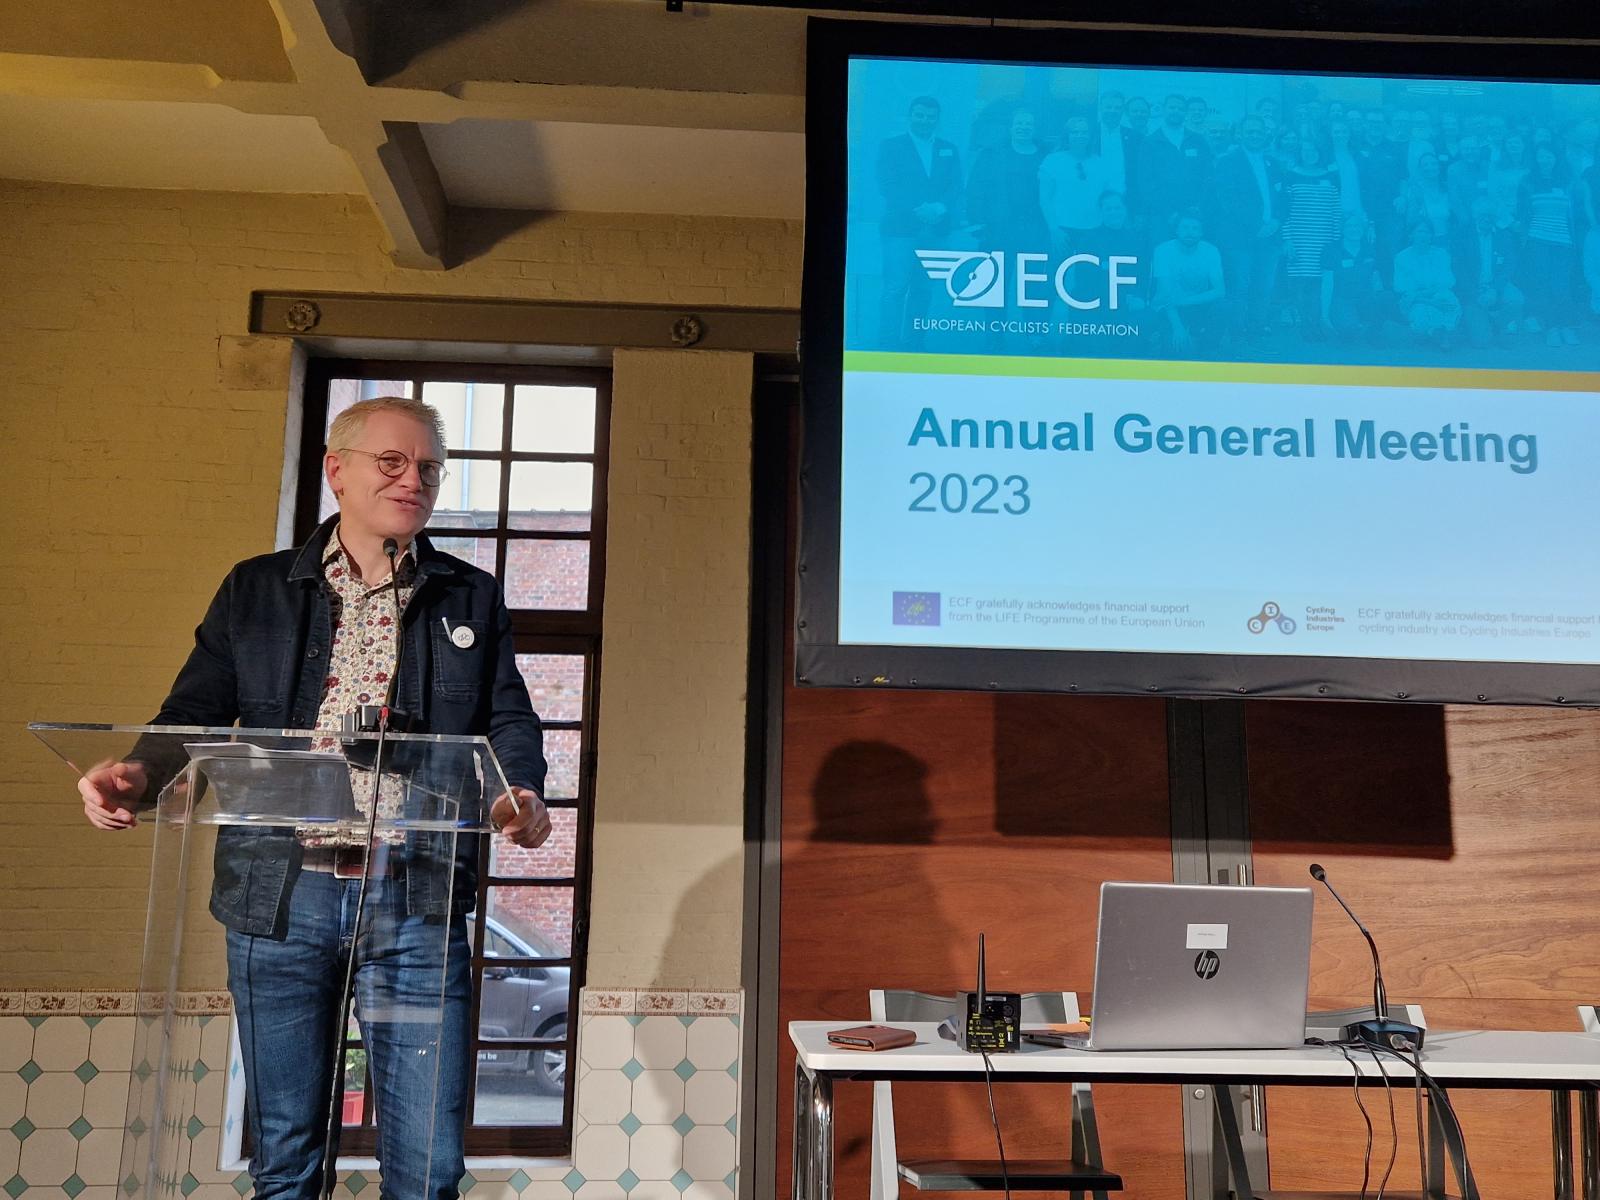 Belgium's Deputy Prime Minister and Transport Minister, Georges Gilkinet speaking at the ECF Annual General Meeting 2023